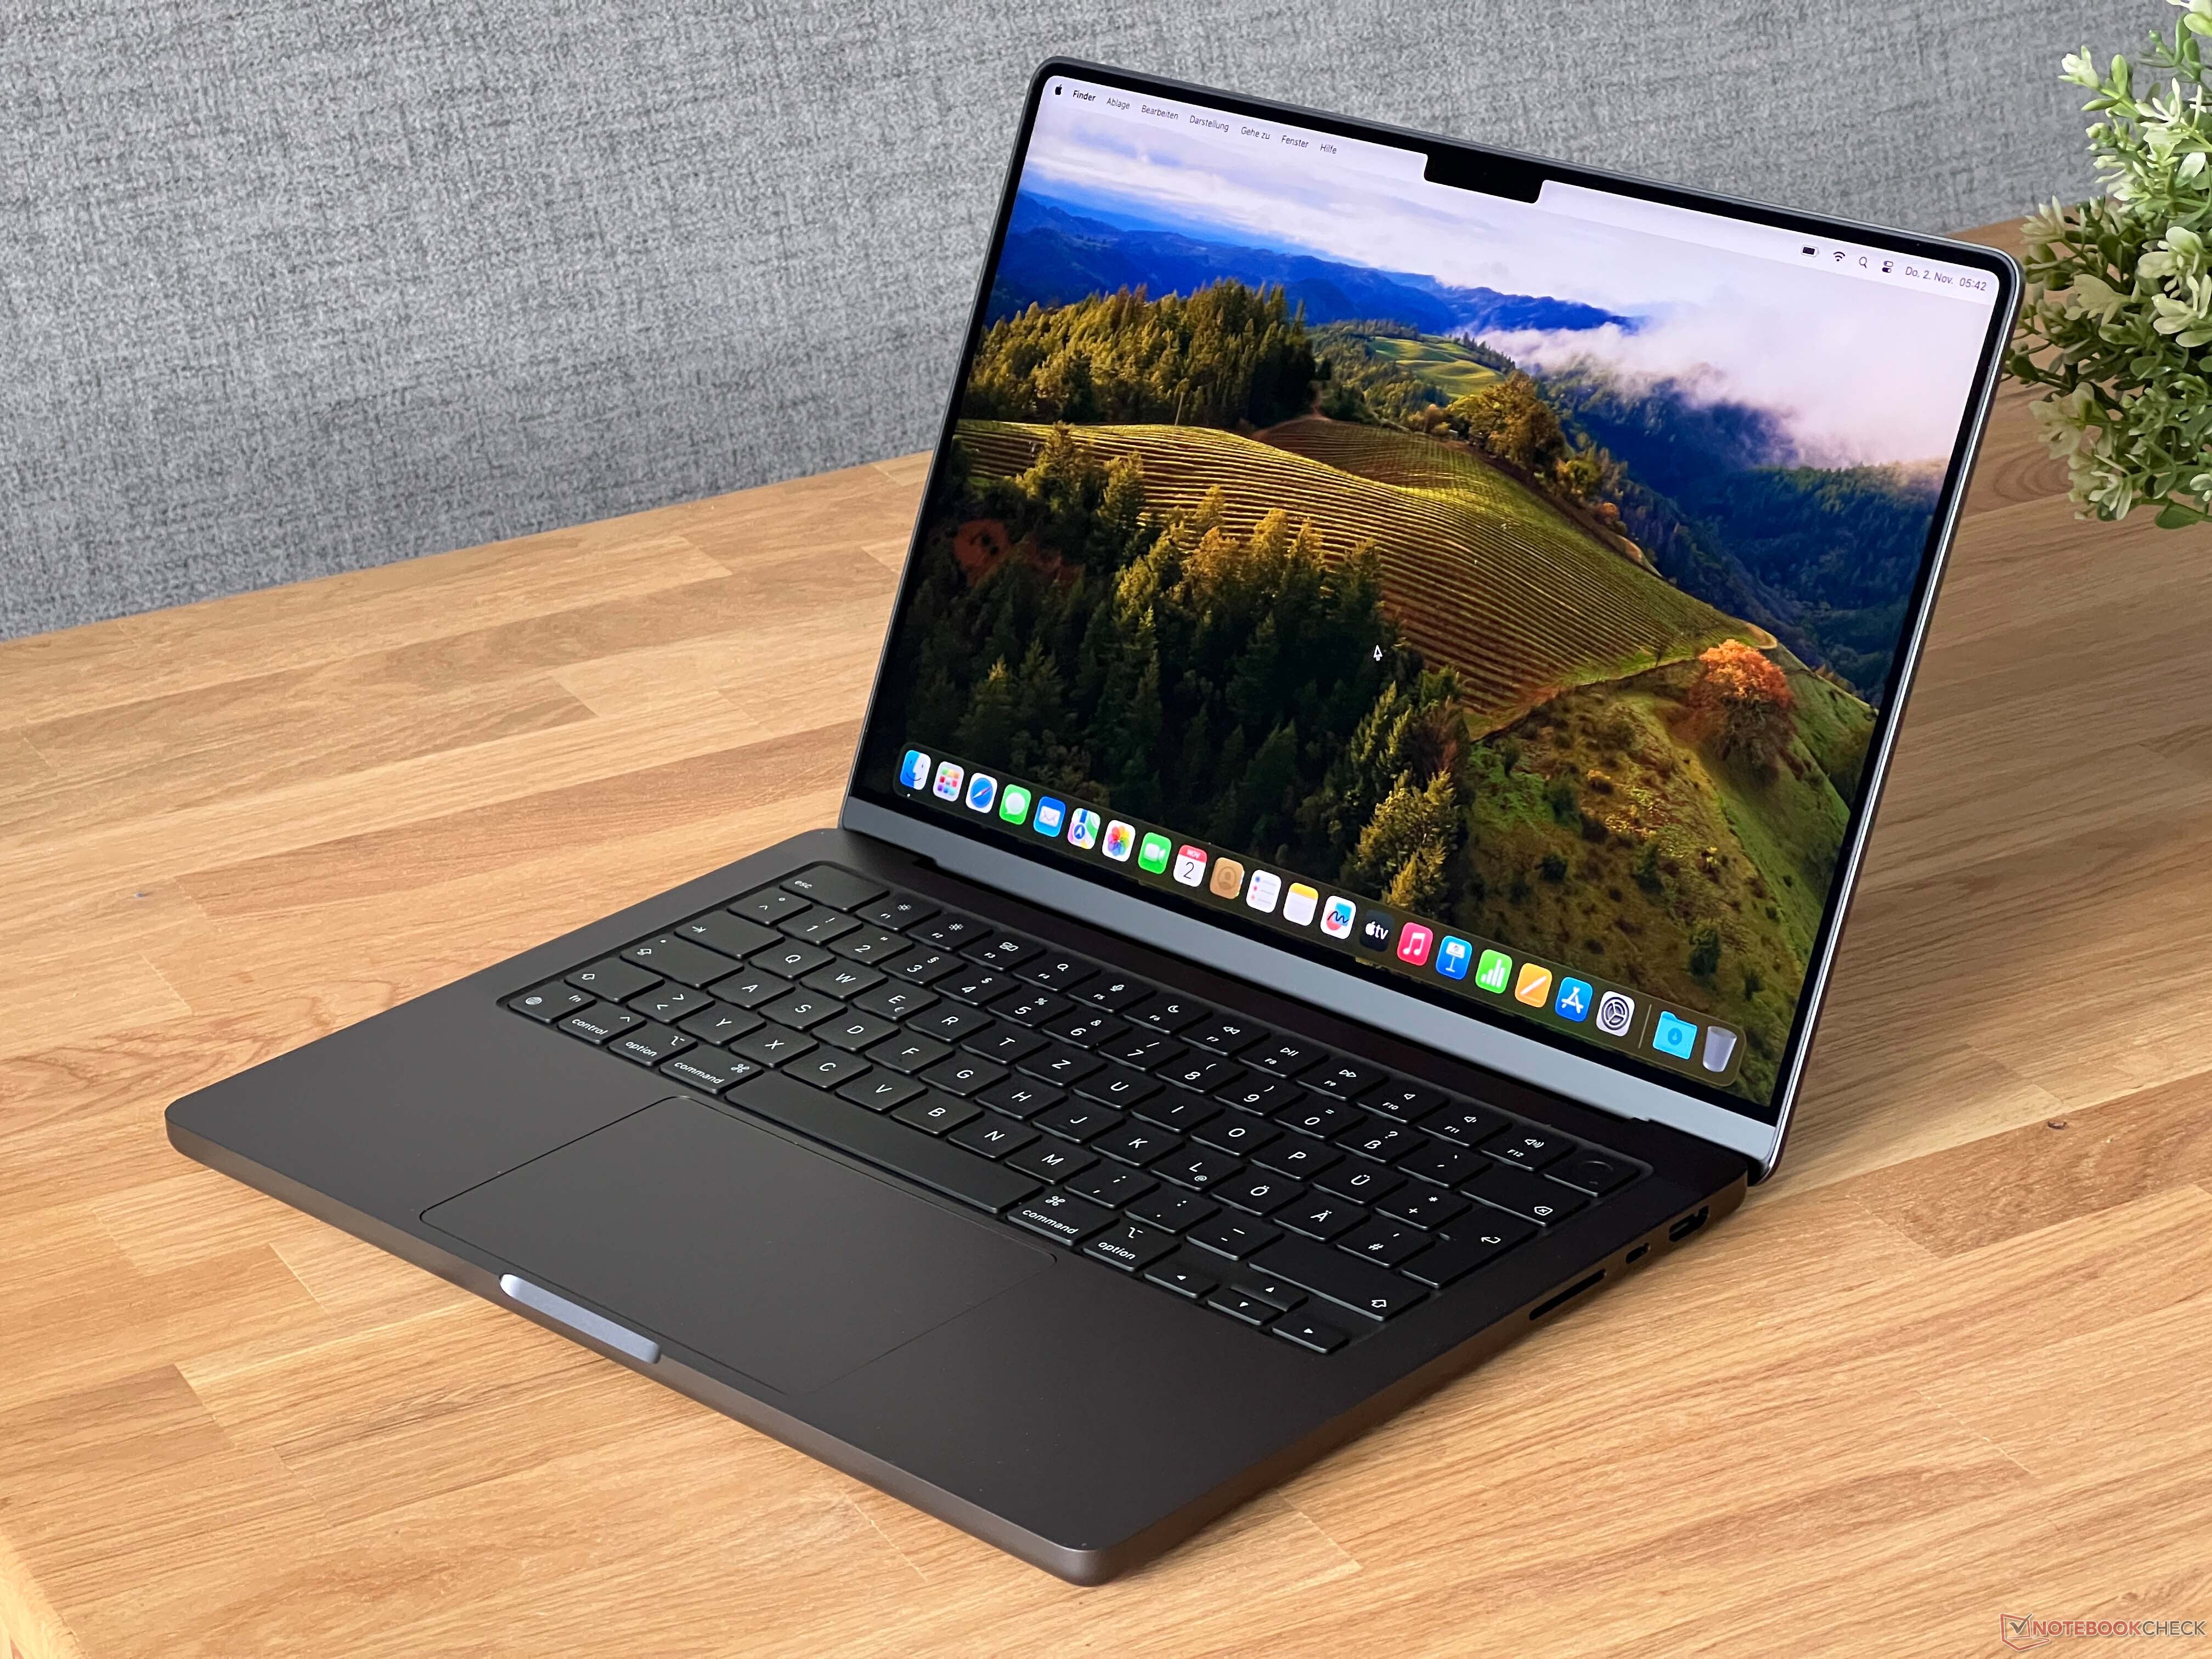 MacBook Pro M3 Max Initial Thoughts and Impressions